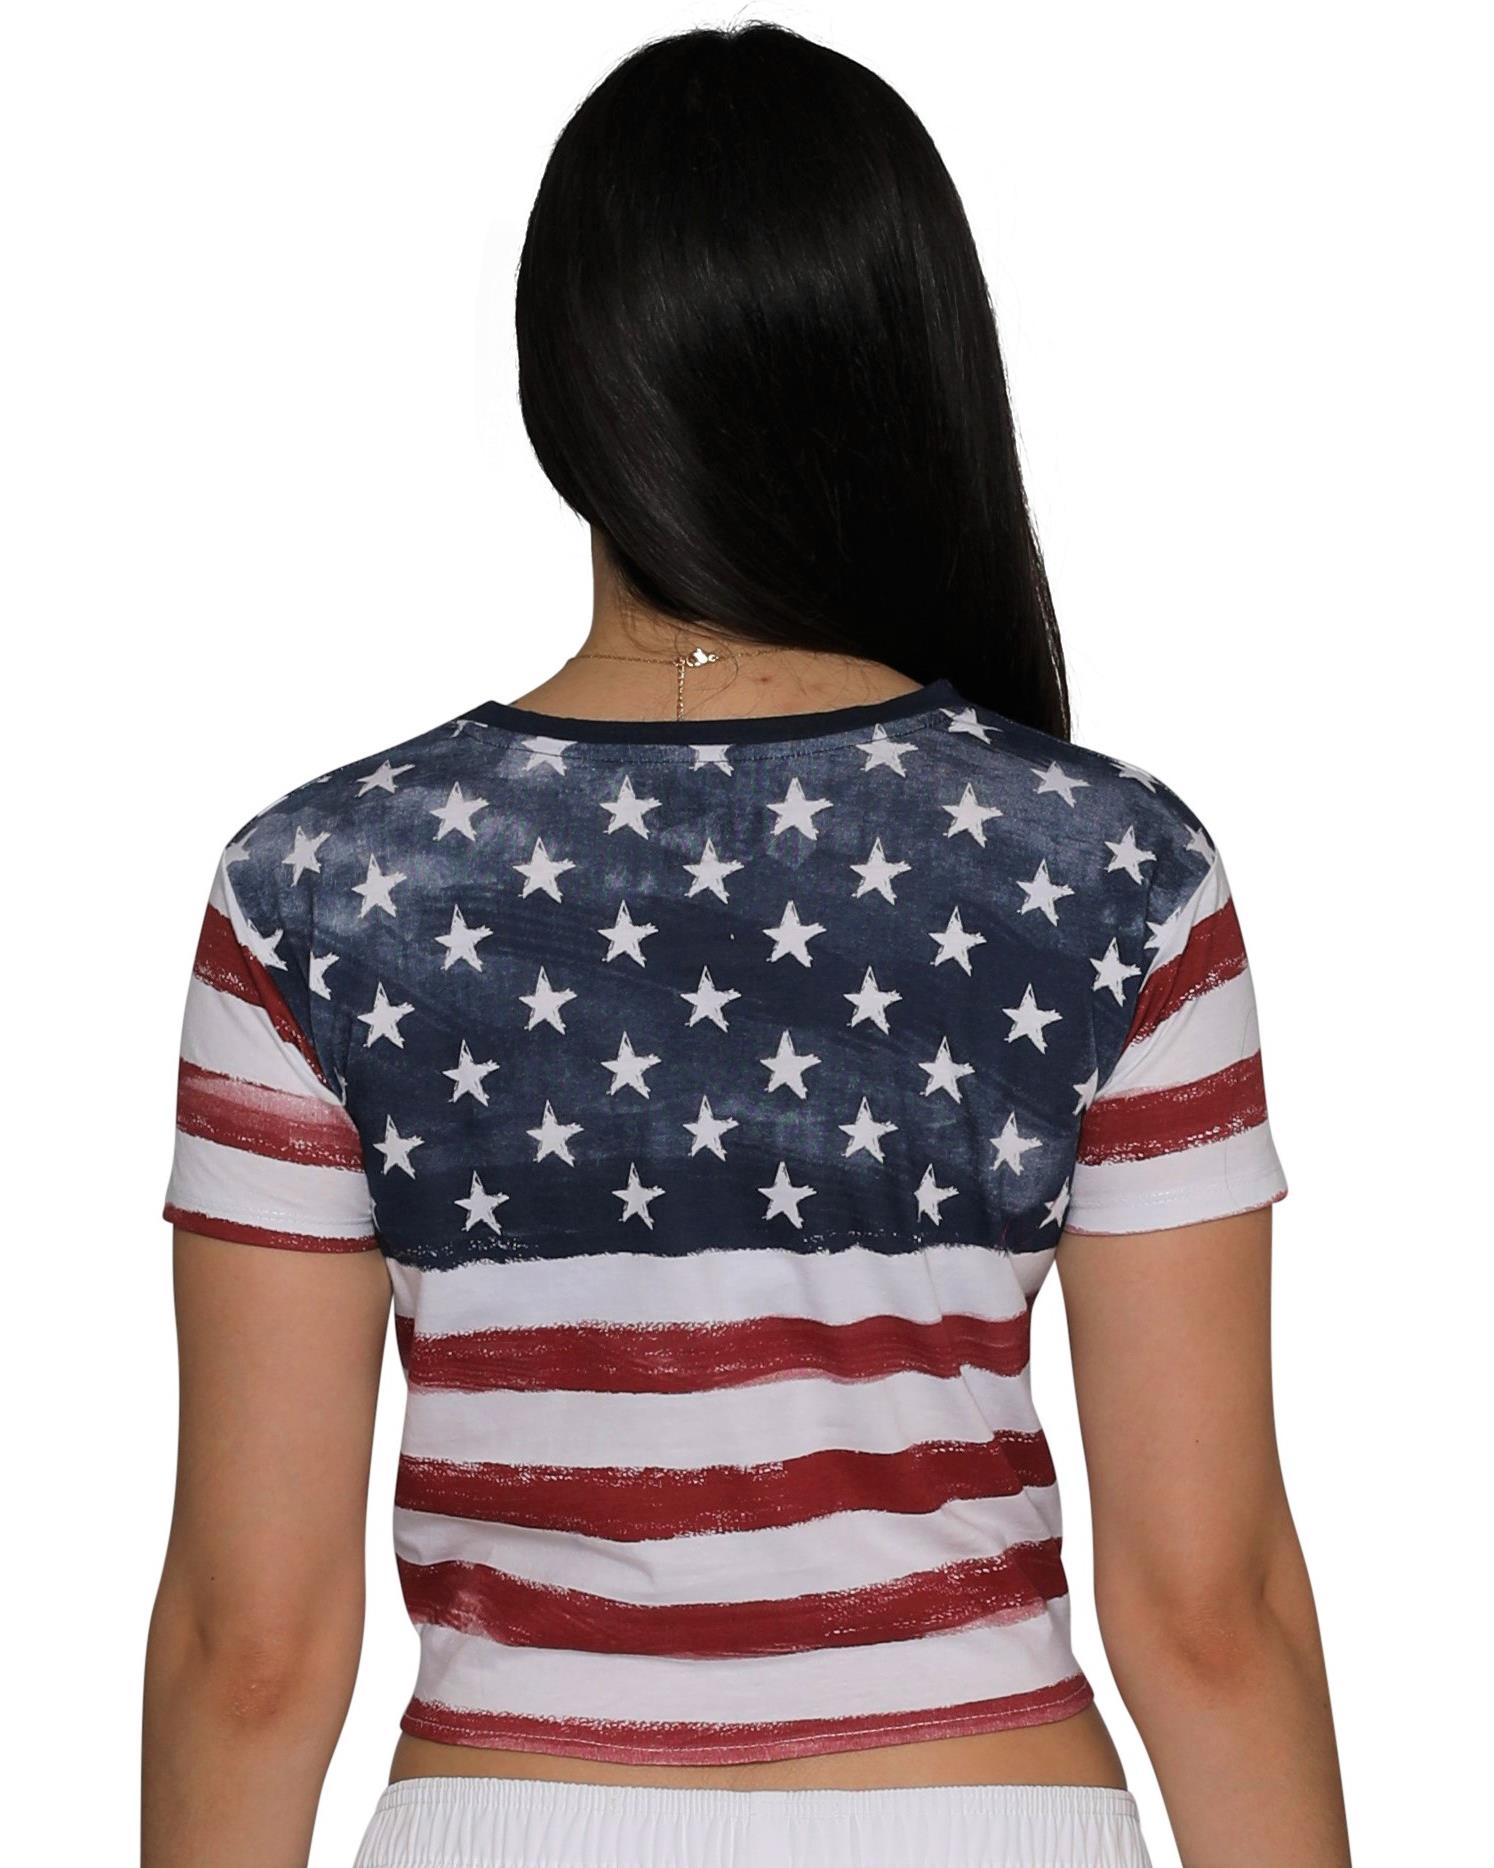 U.S. Vintage Knot Front Cuffed Sleeve / Sleeveless Stars and Stripes Crop Top Tee USA Patriotic T-Shirt, Stars, Size: Large - image 3 of 4